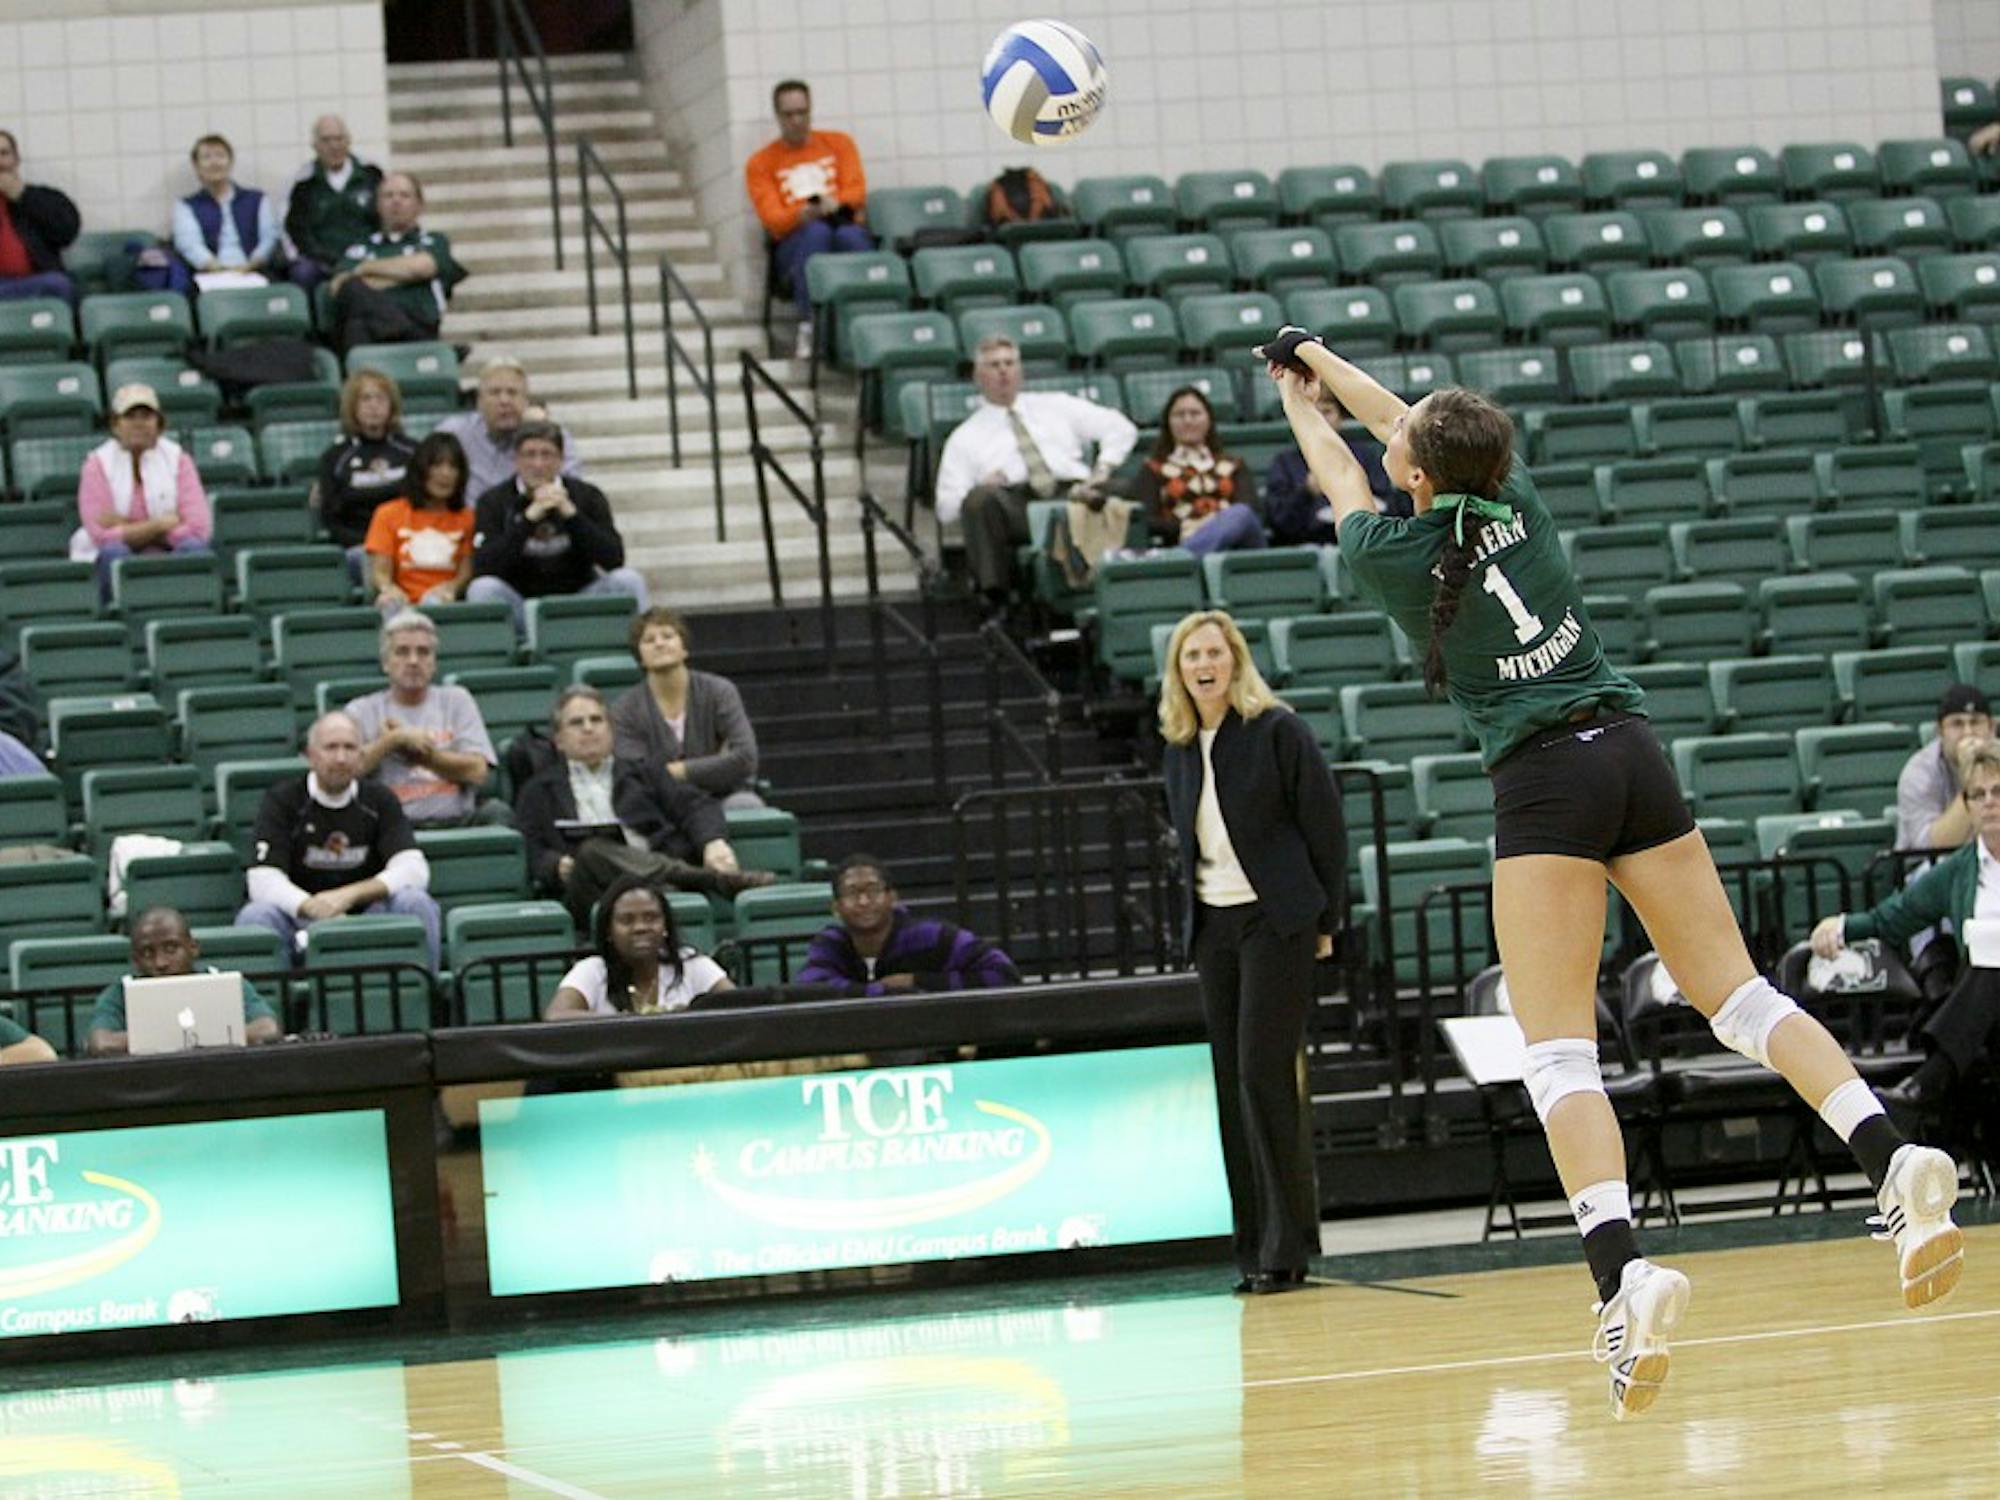 Eastern Michigan University volleyball (No. 5) defeated Bowling Green State University (No. 12) in the first round of the Mid-American Conference volleyball tournament 3-0 Tuesday. The Eagles advance to the quarterfinal round at 11 a.m. Friday.